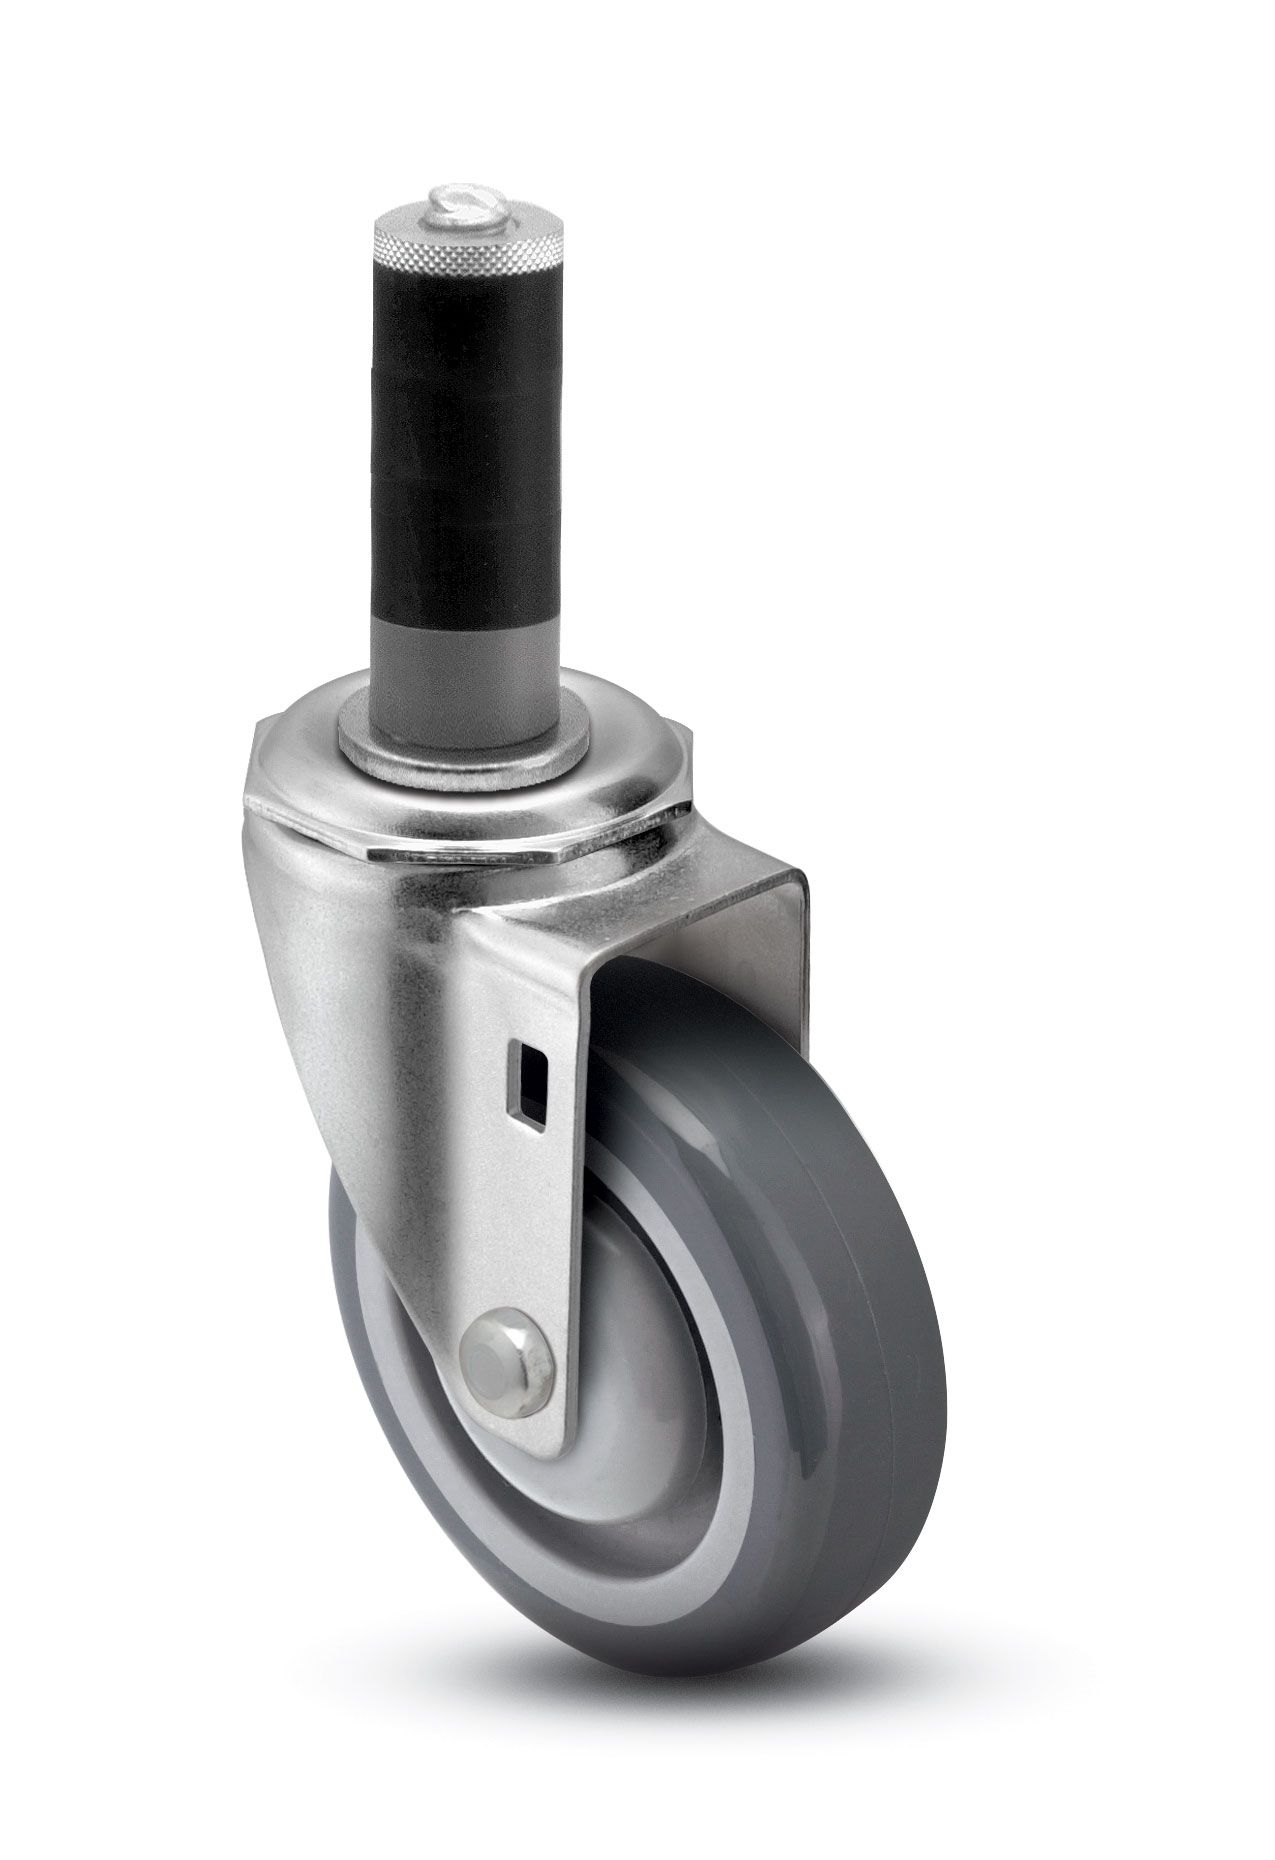 Caster; Swivel; 3" x 1-1/4"; PolyU on PolyO (Gray); Expandable Adapter (1-1/2" - 1-9/16" ID tubing); Zinc; Precision Ball Brng; 275#; Dust Cover (Item #63672)